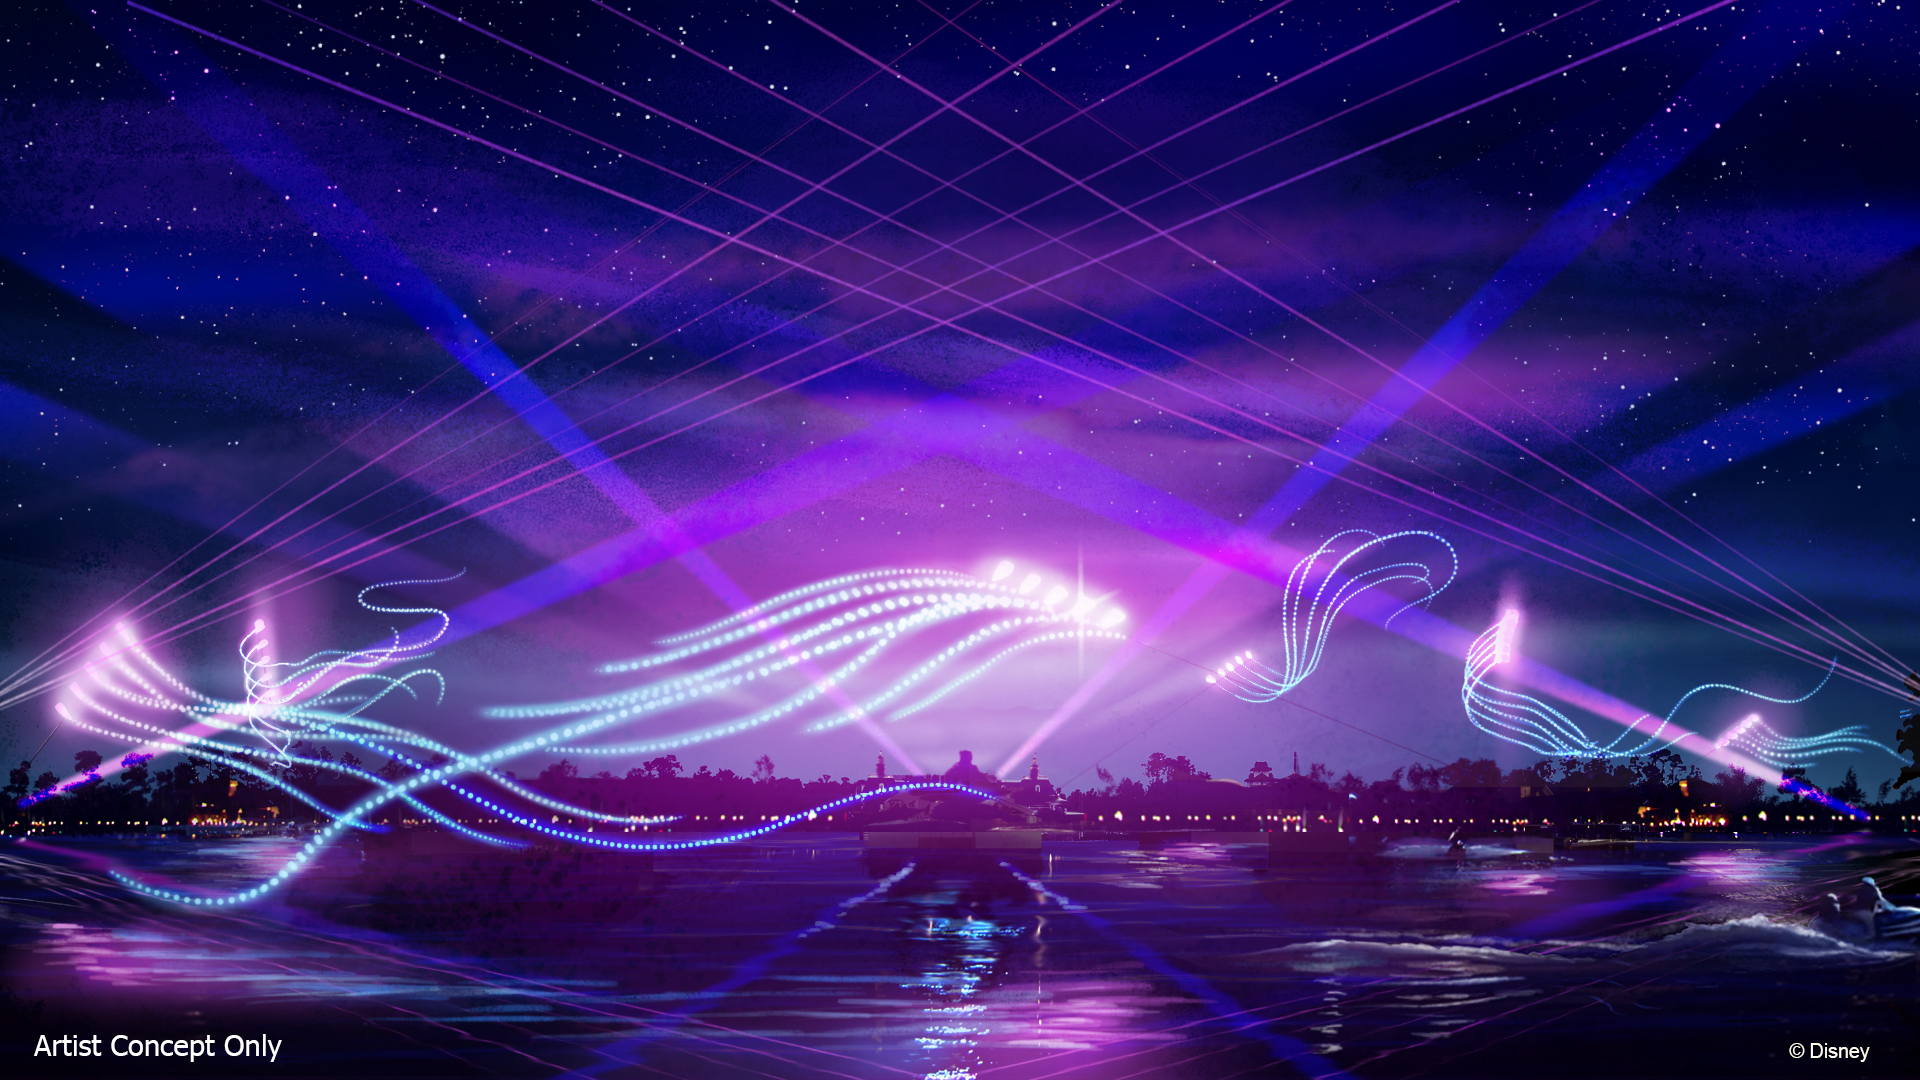 New Nighttime Spectacular ‘Epcot Forever’ to Debut Oct. 1 at Walt Disney World Resort